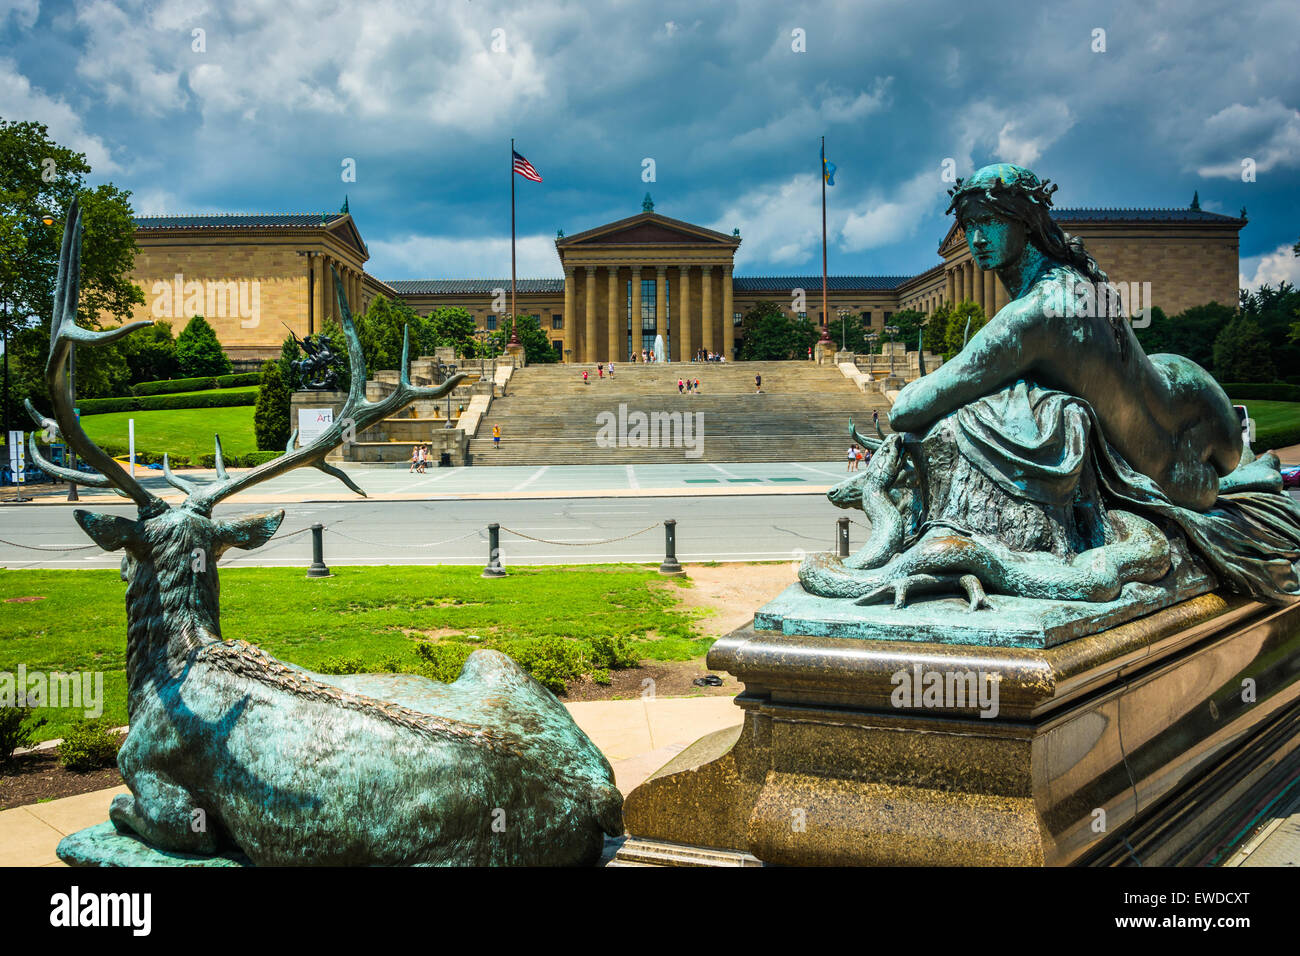 Statues at Eakins Oval and the Museum of Art in Philadelphia, Pennsylvania. Stock Photo